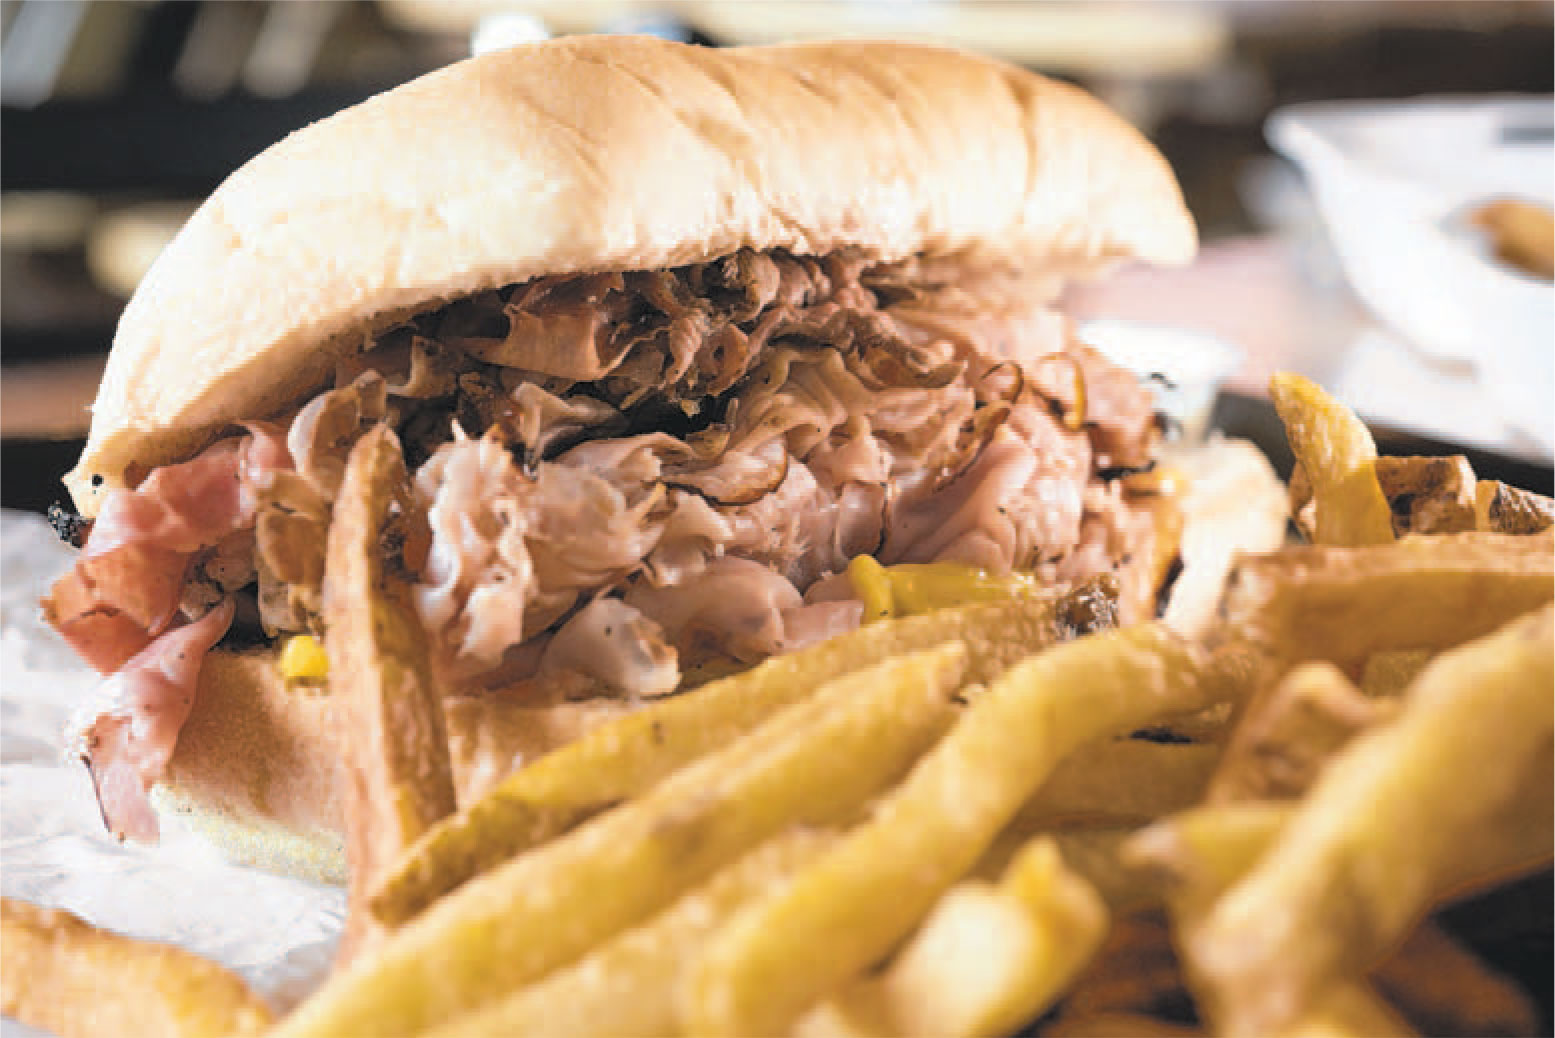 Chaps Pit Beef is Classic Charm City